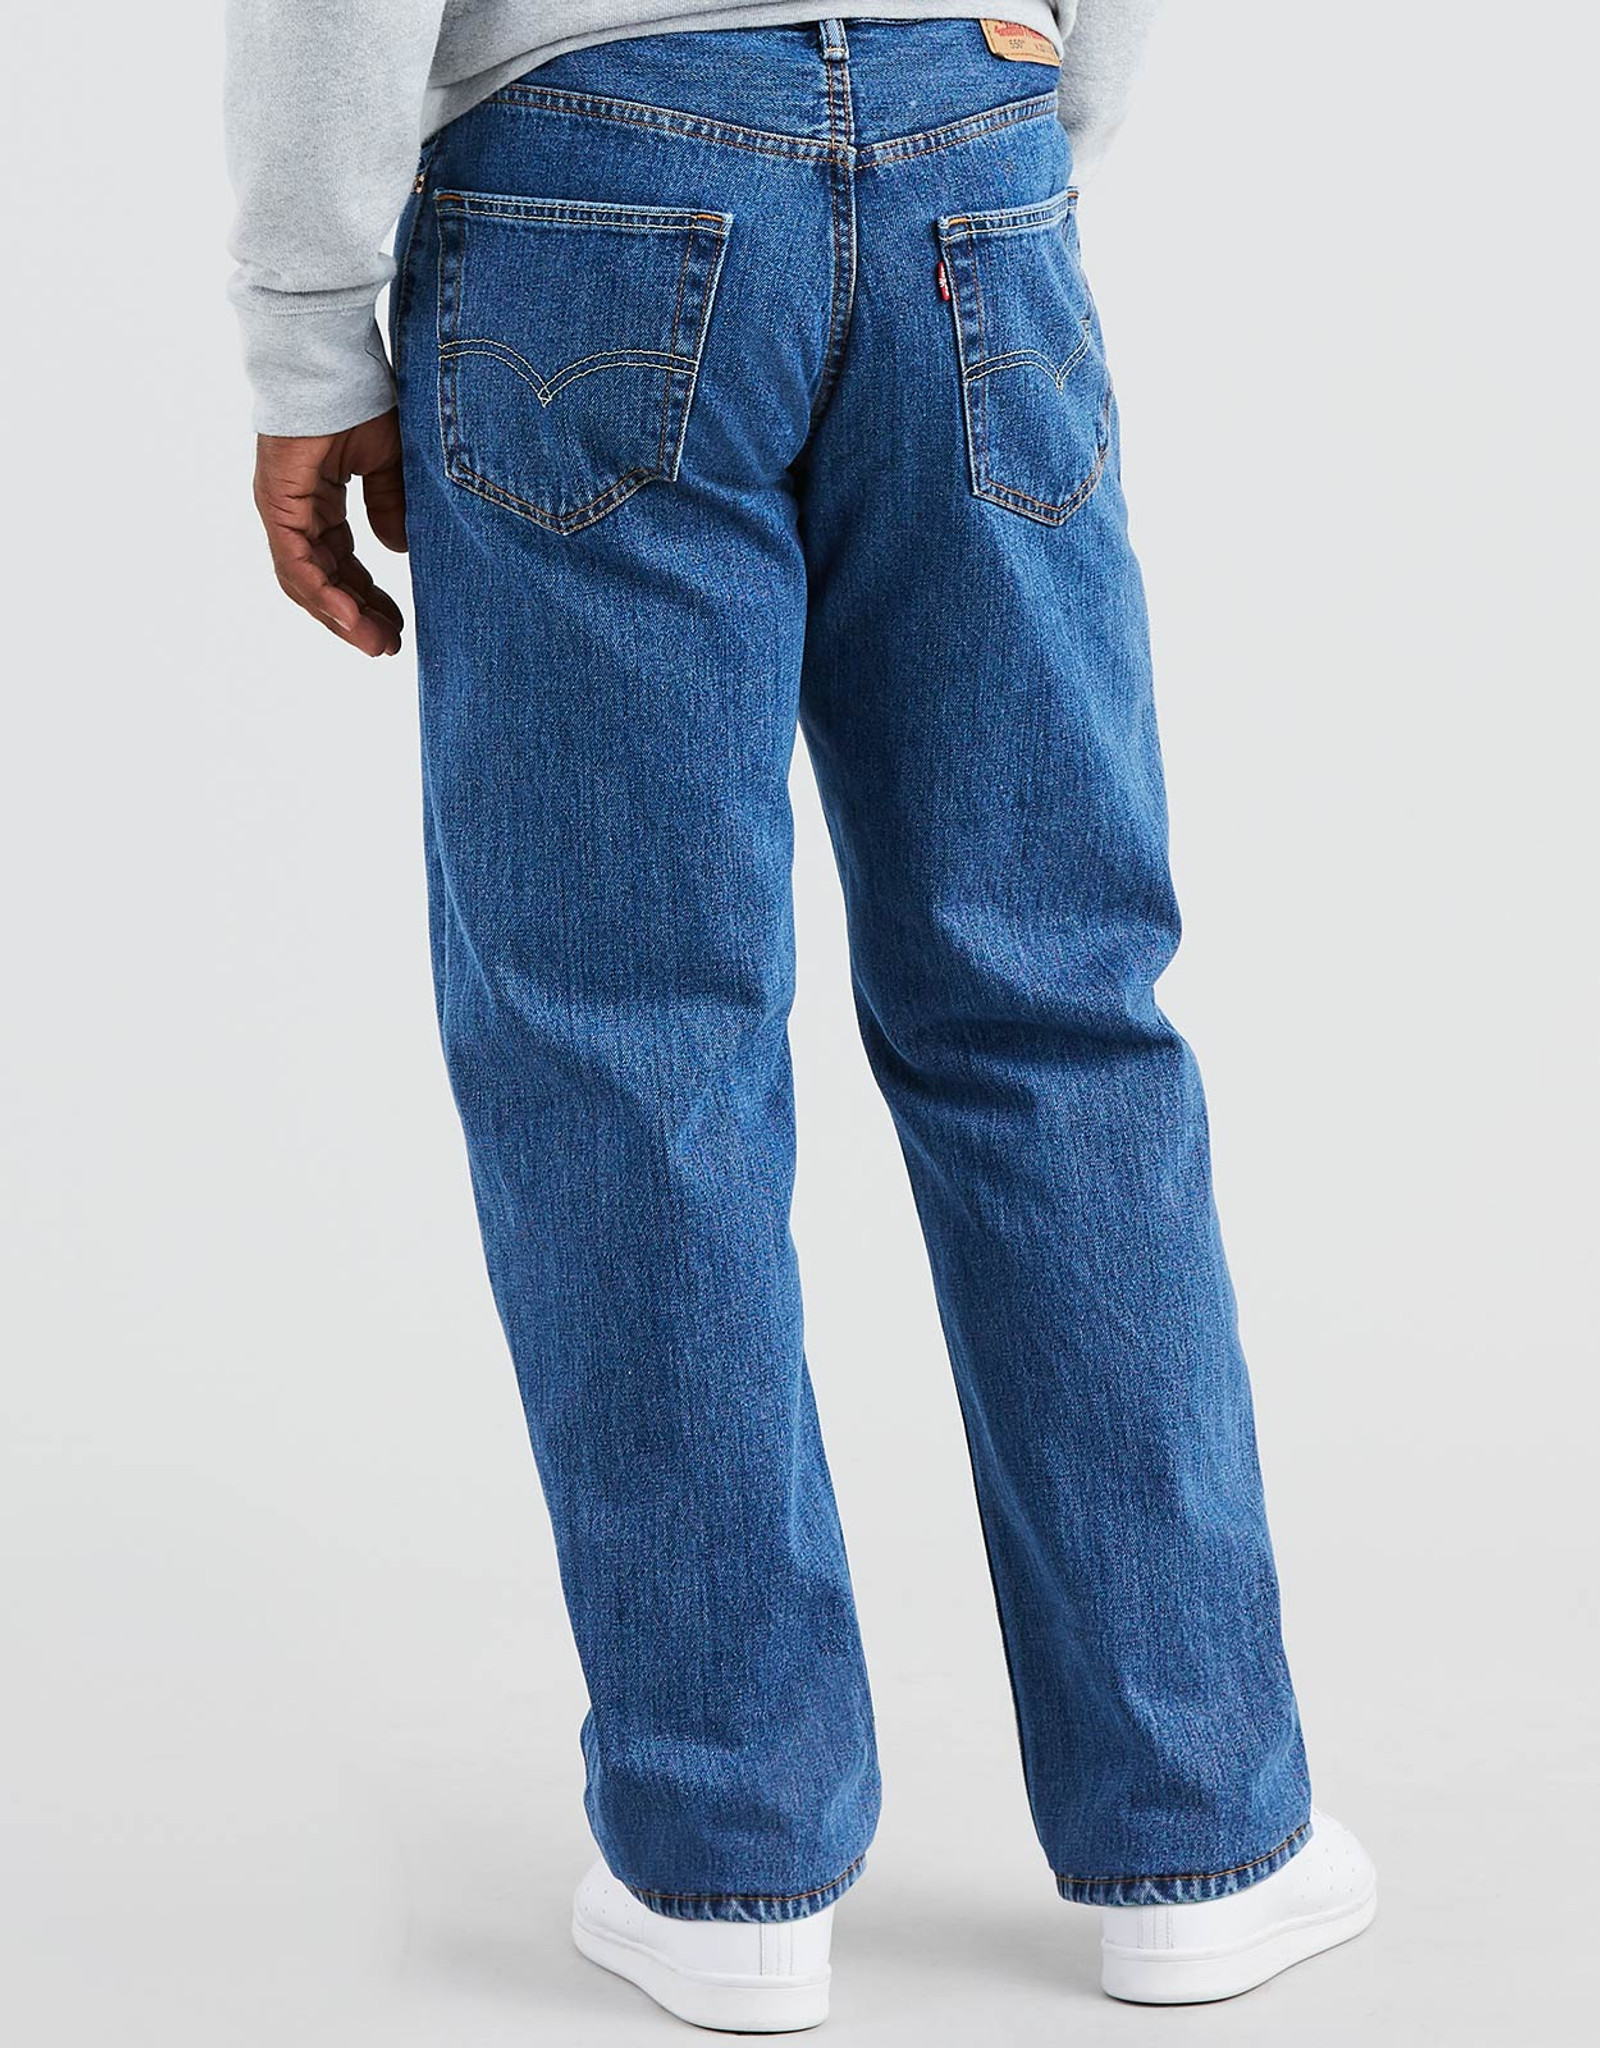 Levi's Men's 550 Relaxed Mid Rise Relaxed Fit Tapered Leg Jeans